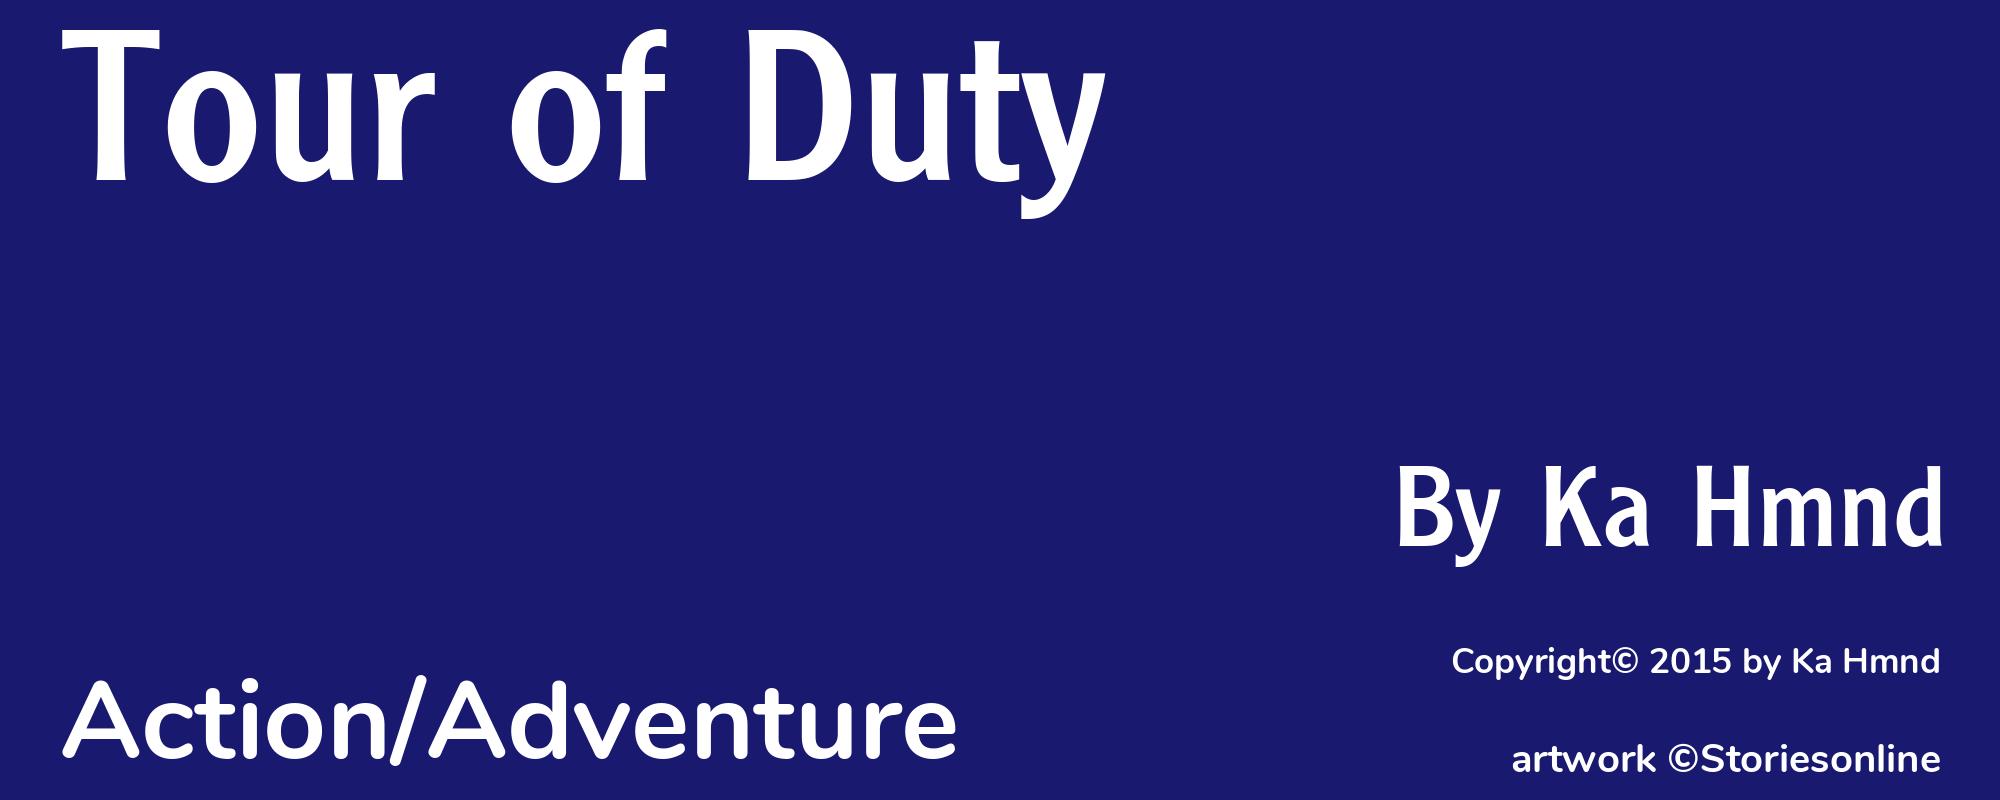 Tour of Duty - Cover